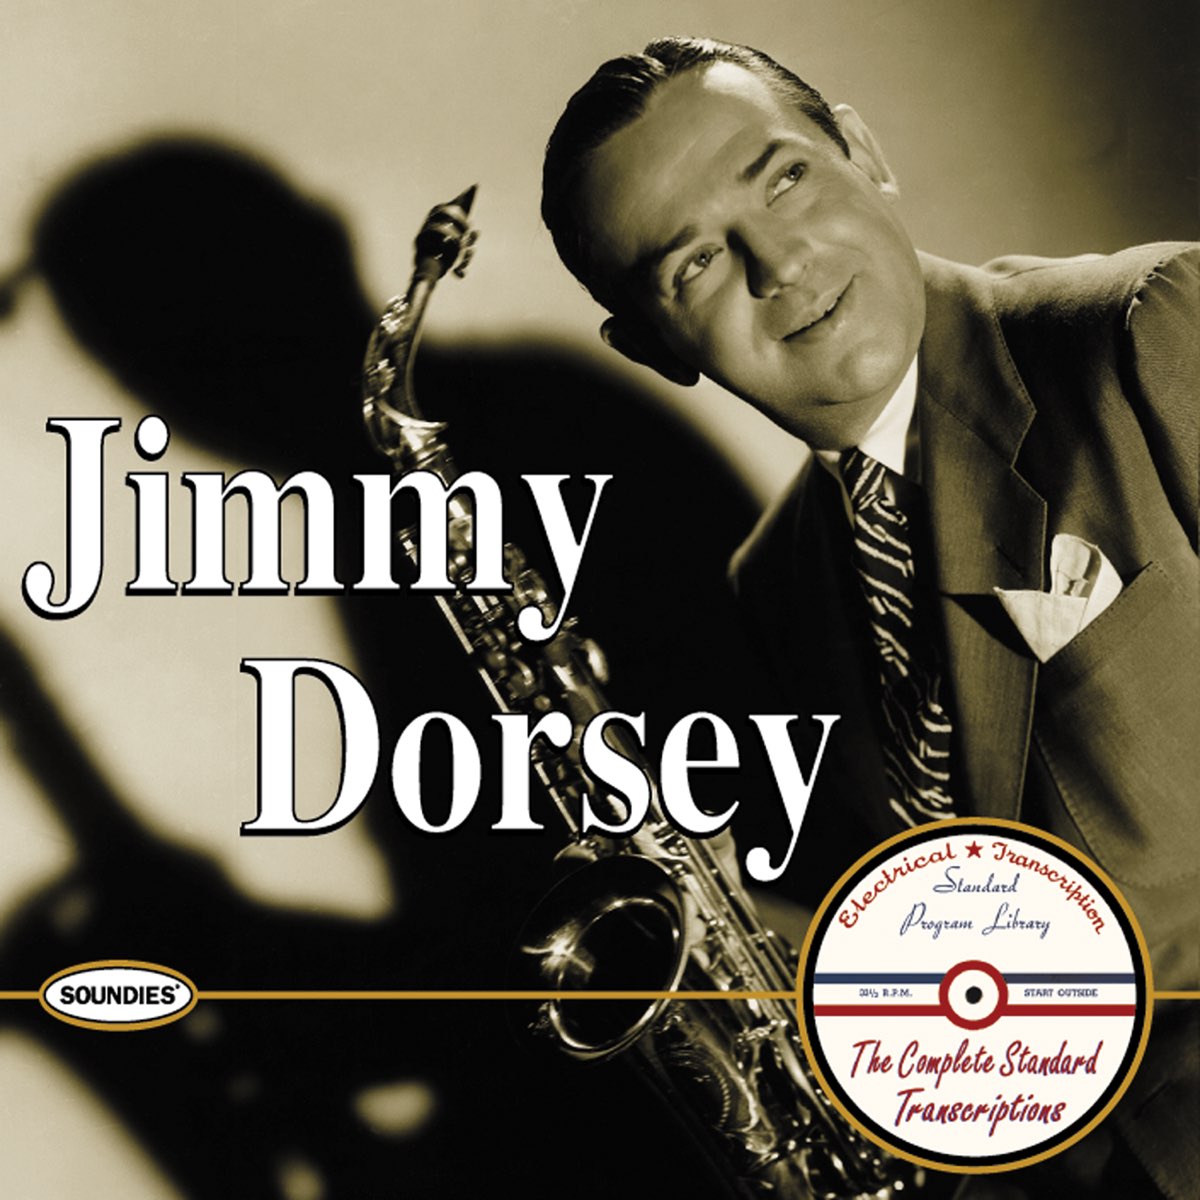 Jimmy Dorsey: The Complete Standard Transcriptions - Album by